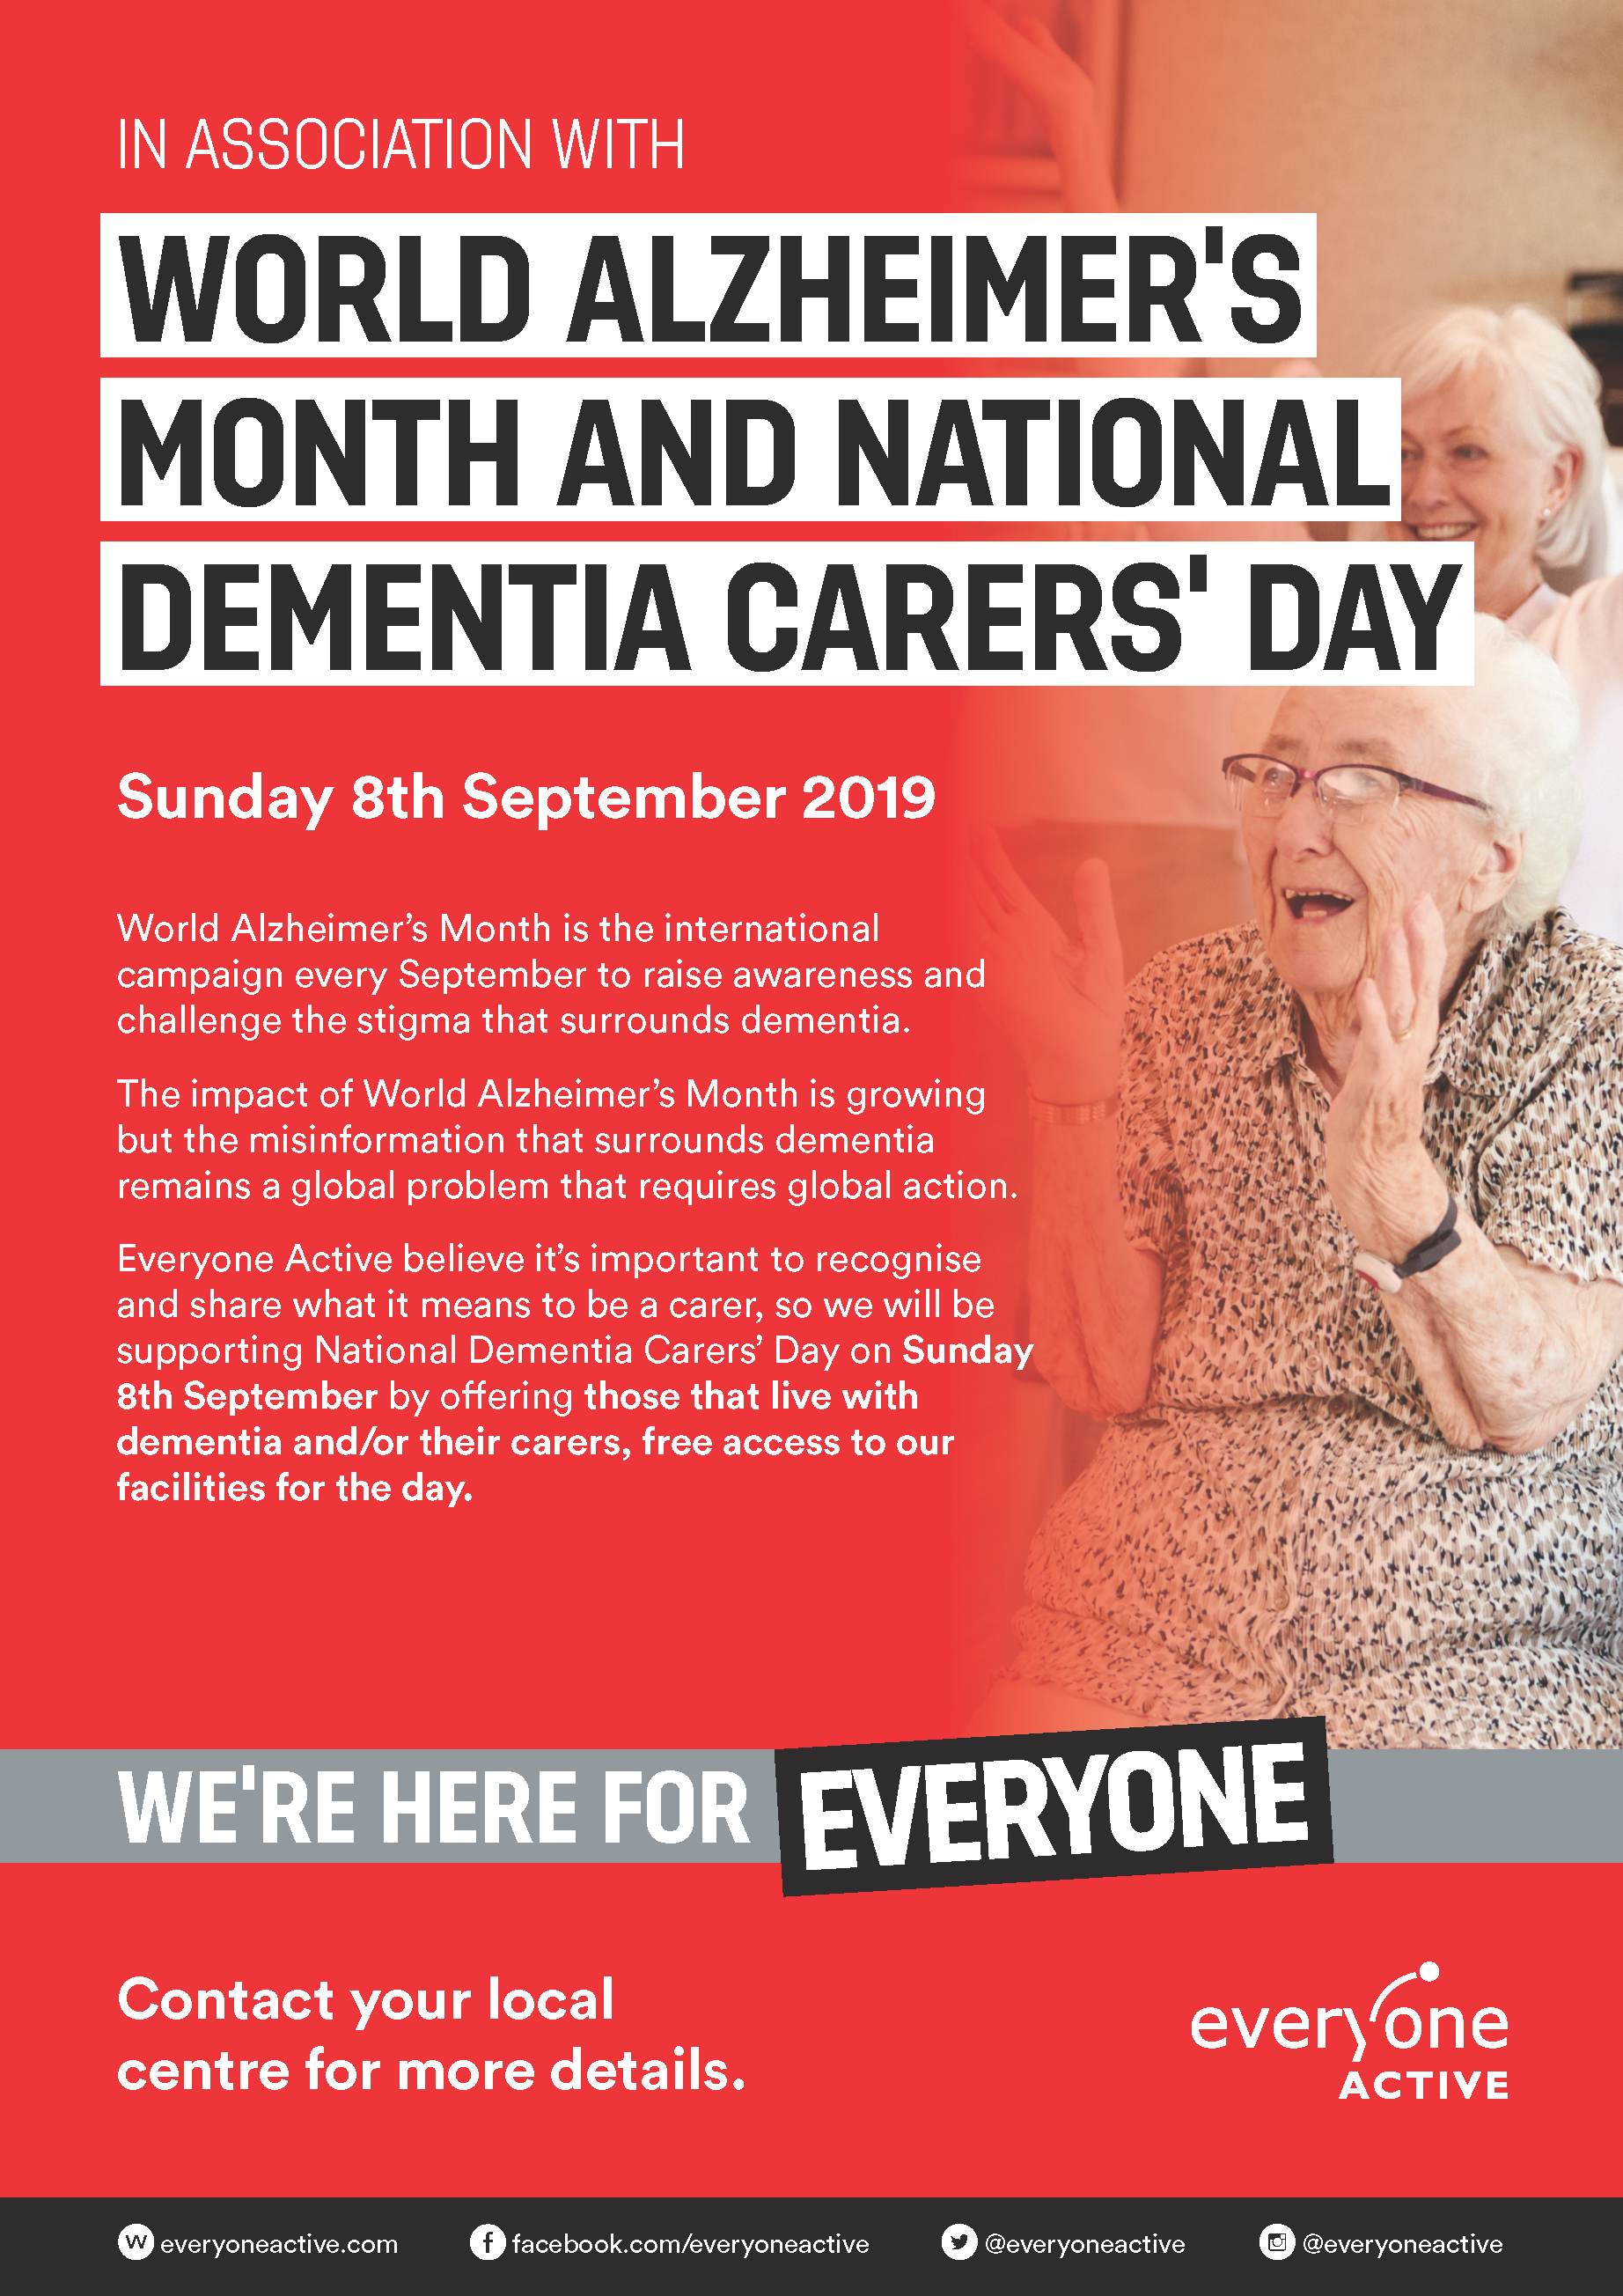 World Alzheimer's Month and National Dementia Carers' Day RCVDA